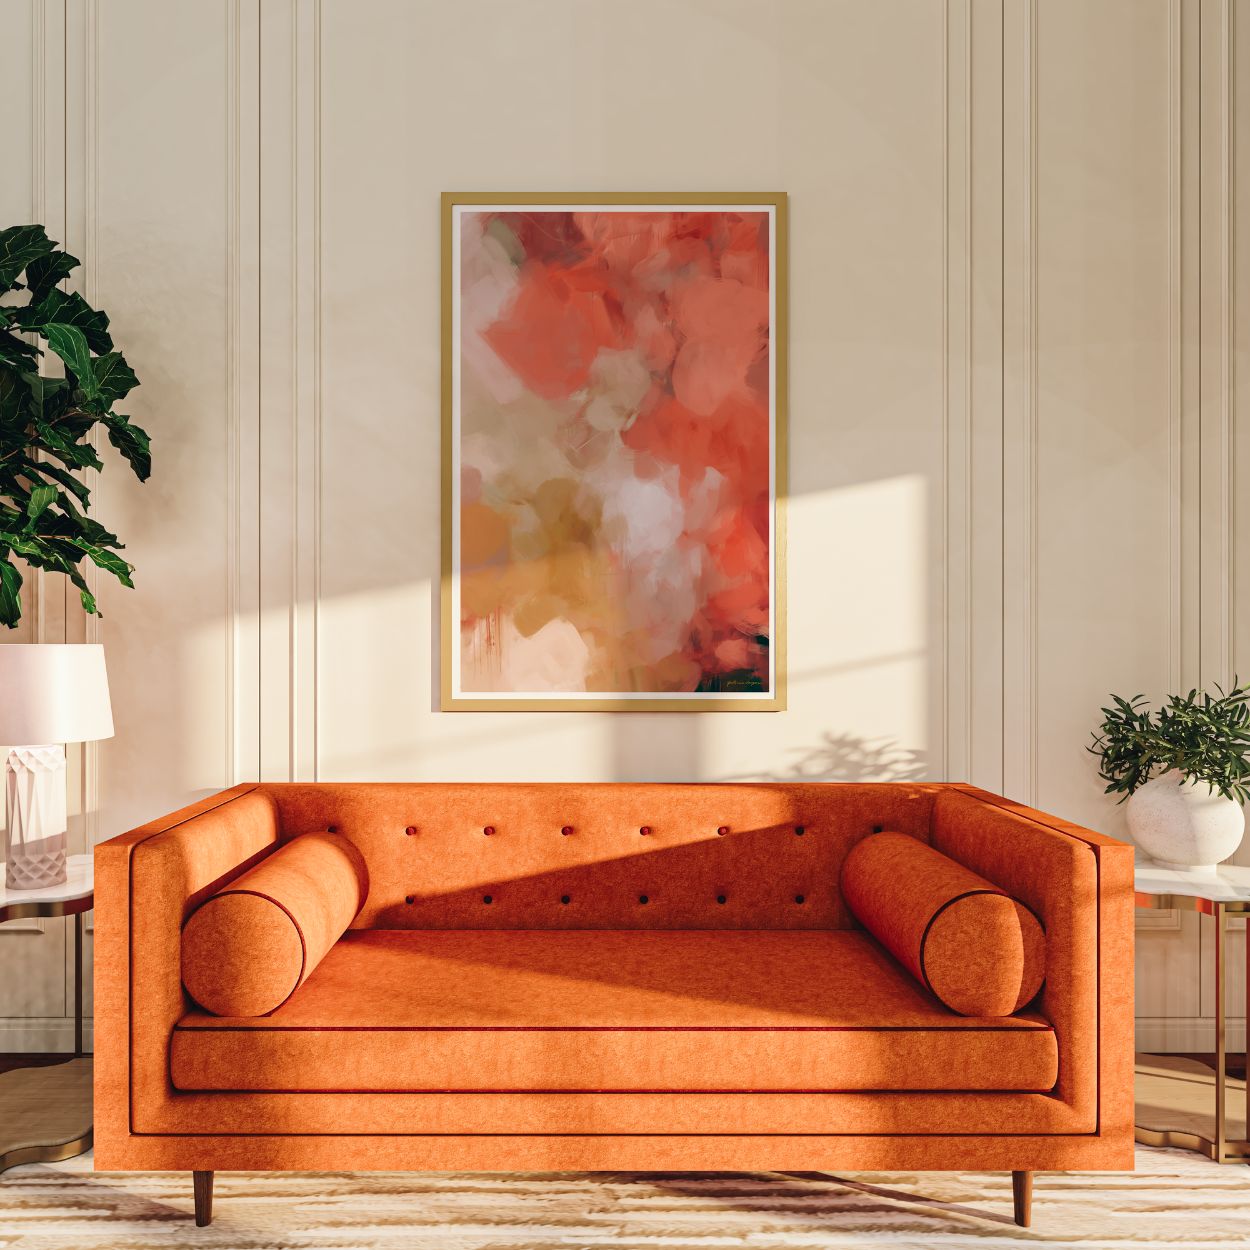 Begonia, pink and gold colorful abstract wall art print by Parima Studio. Oversize art for over sofa in living room